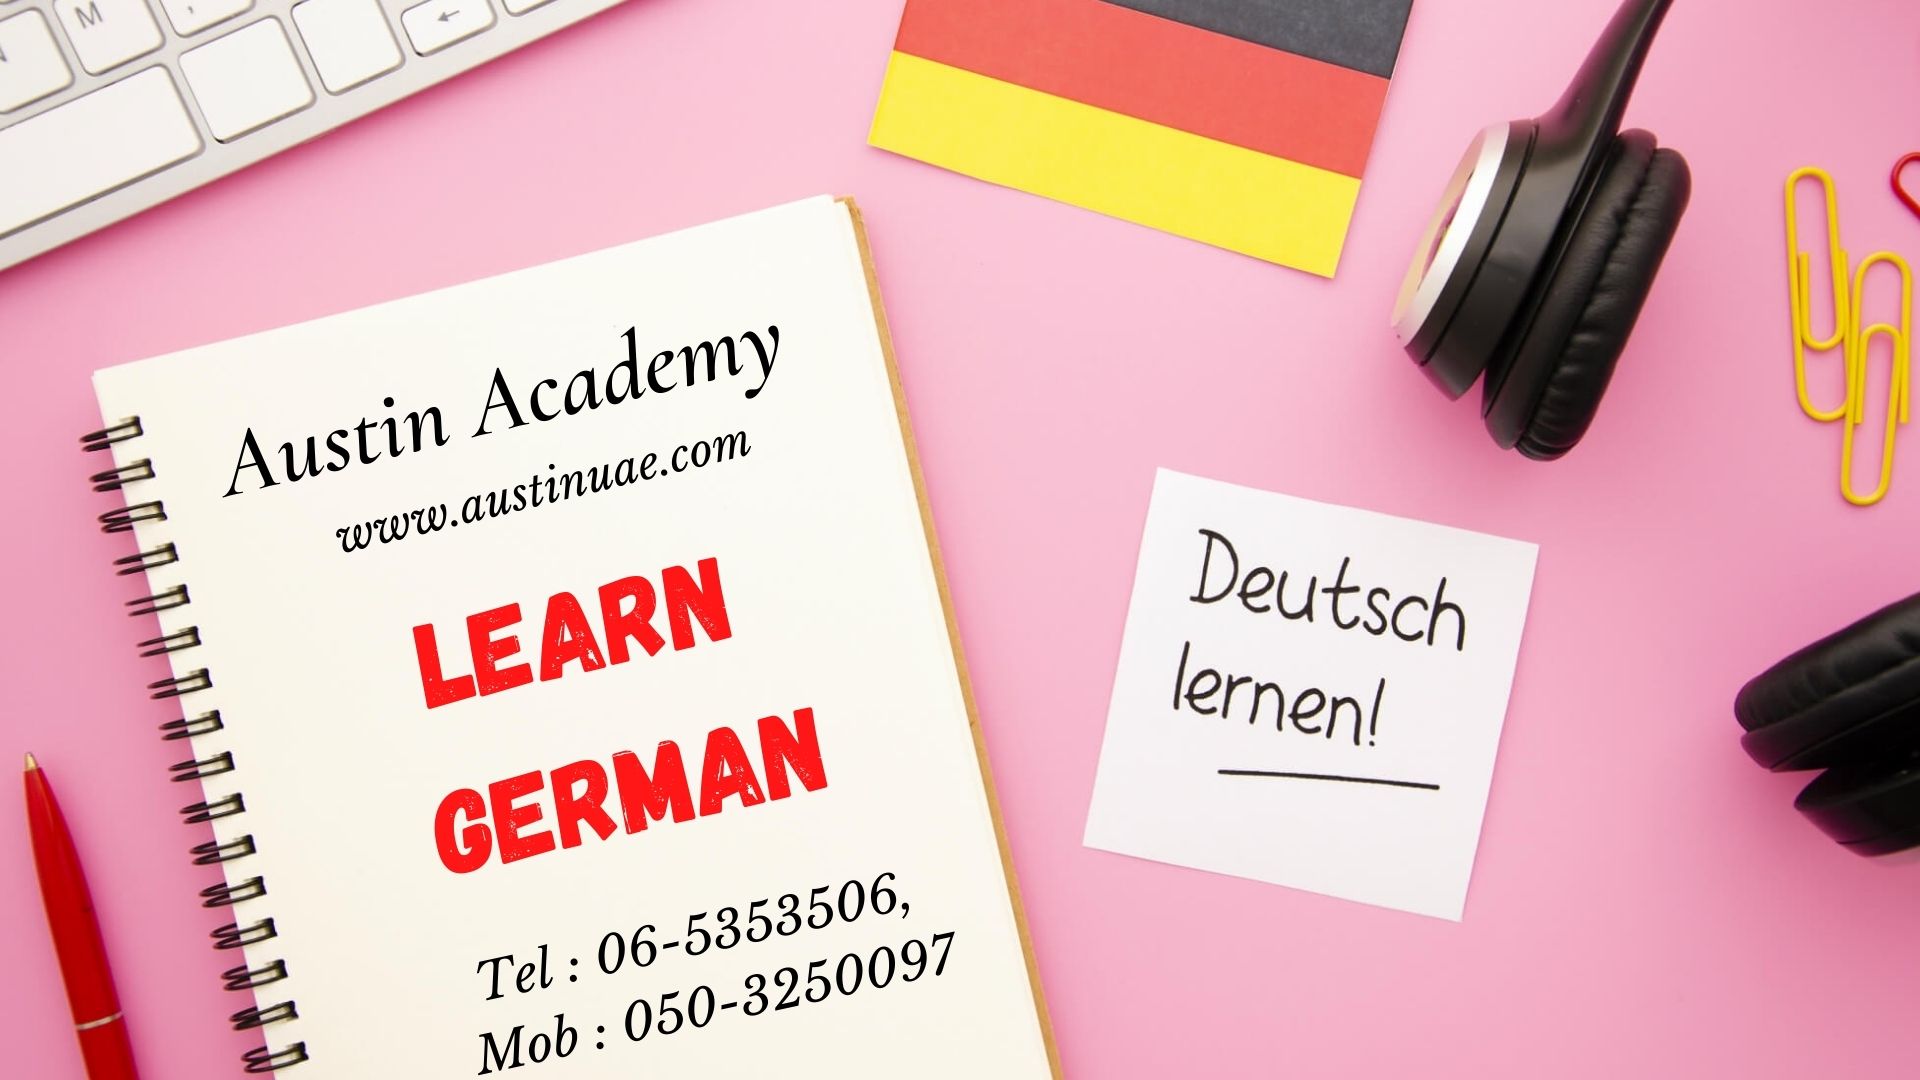 German Language Classes In Sharjah With Best Offer Call 0588197415